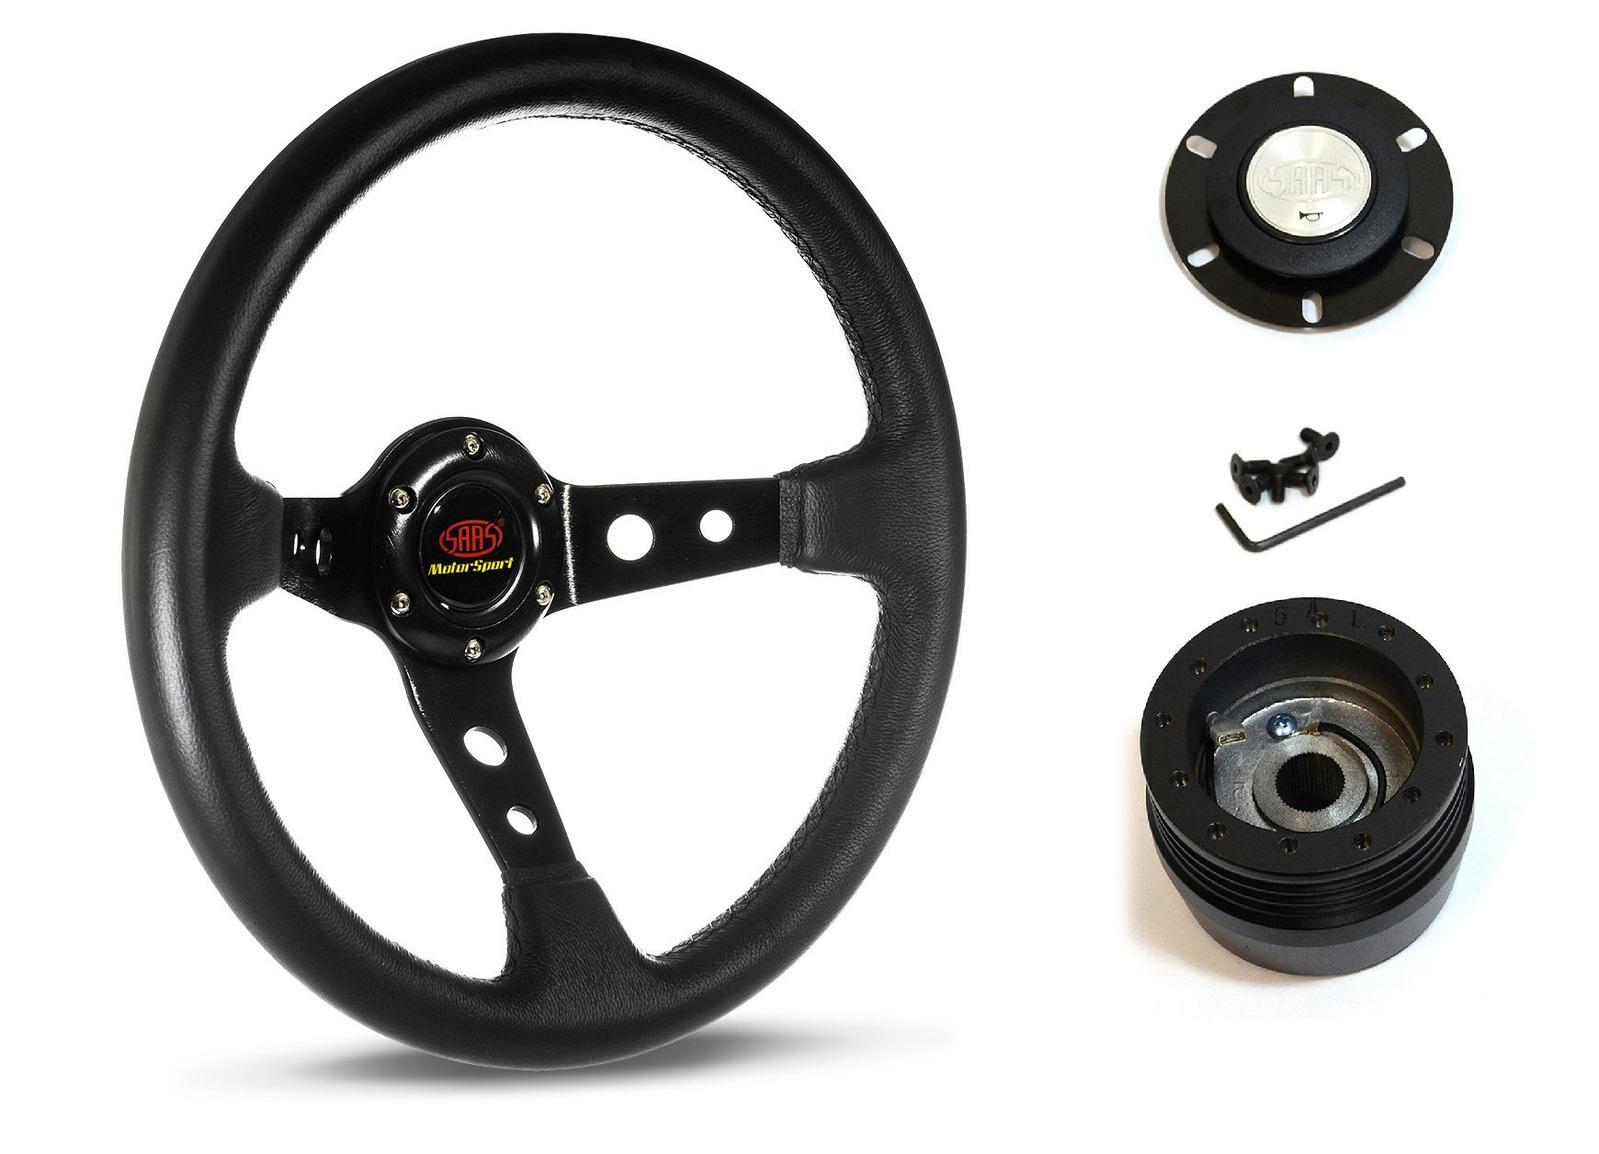 SAAS Steering Wheel Leather 14" ADR GT Deep Dish Black With Holes SWGT3 and SAAS boss kit for Ford Fairlane ZG ZH ZJ 1973-1982